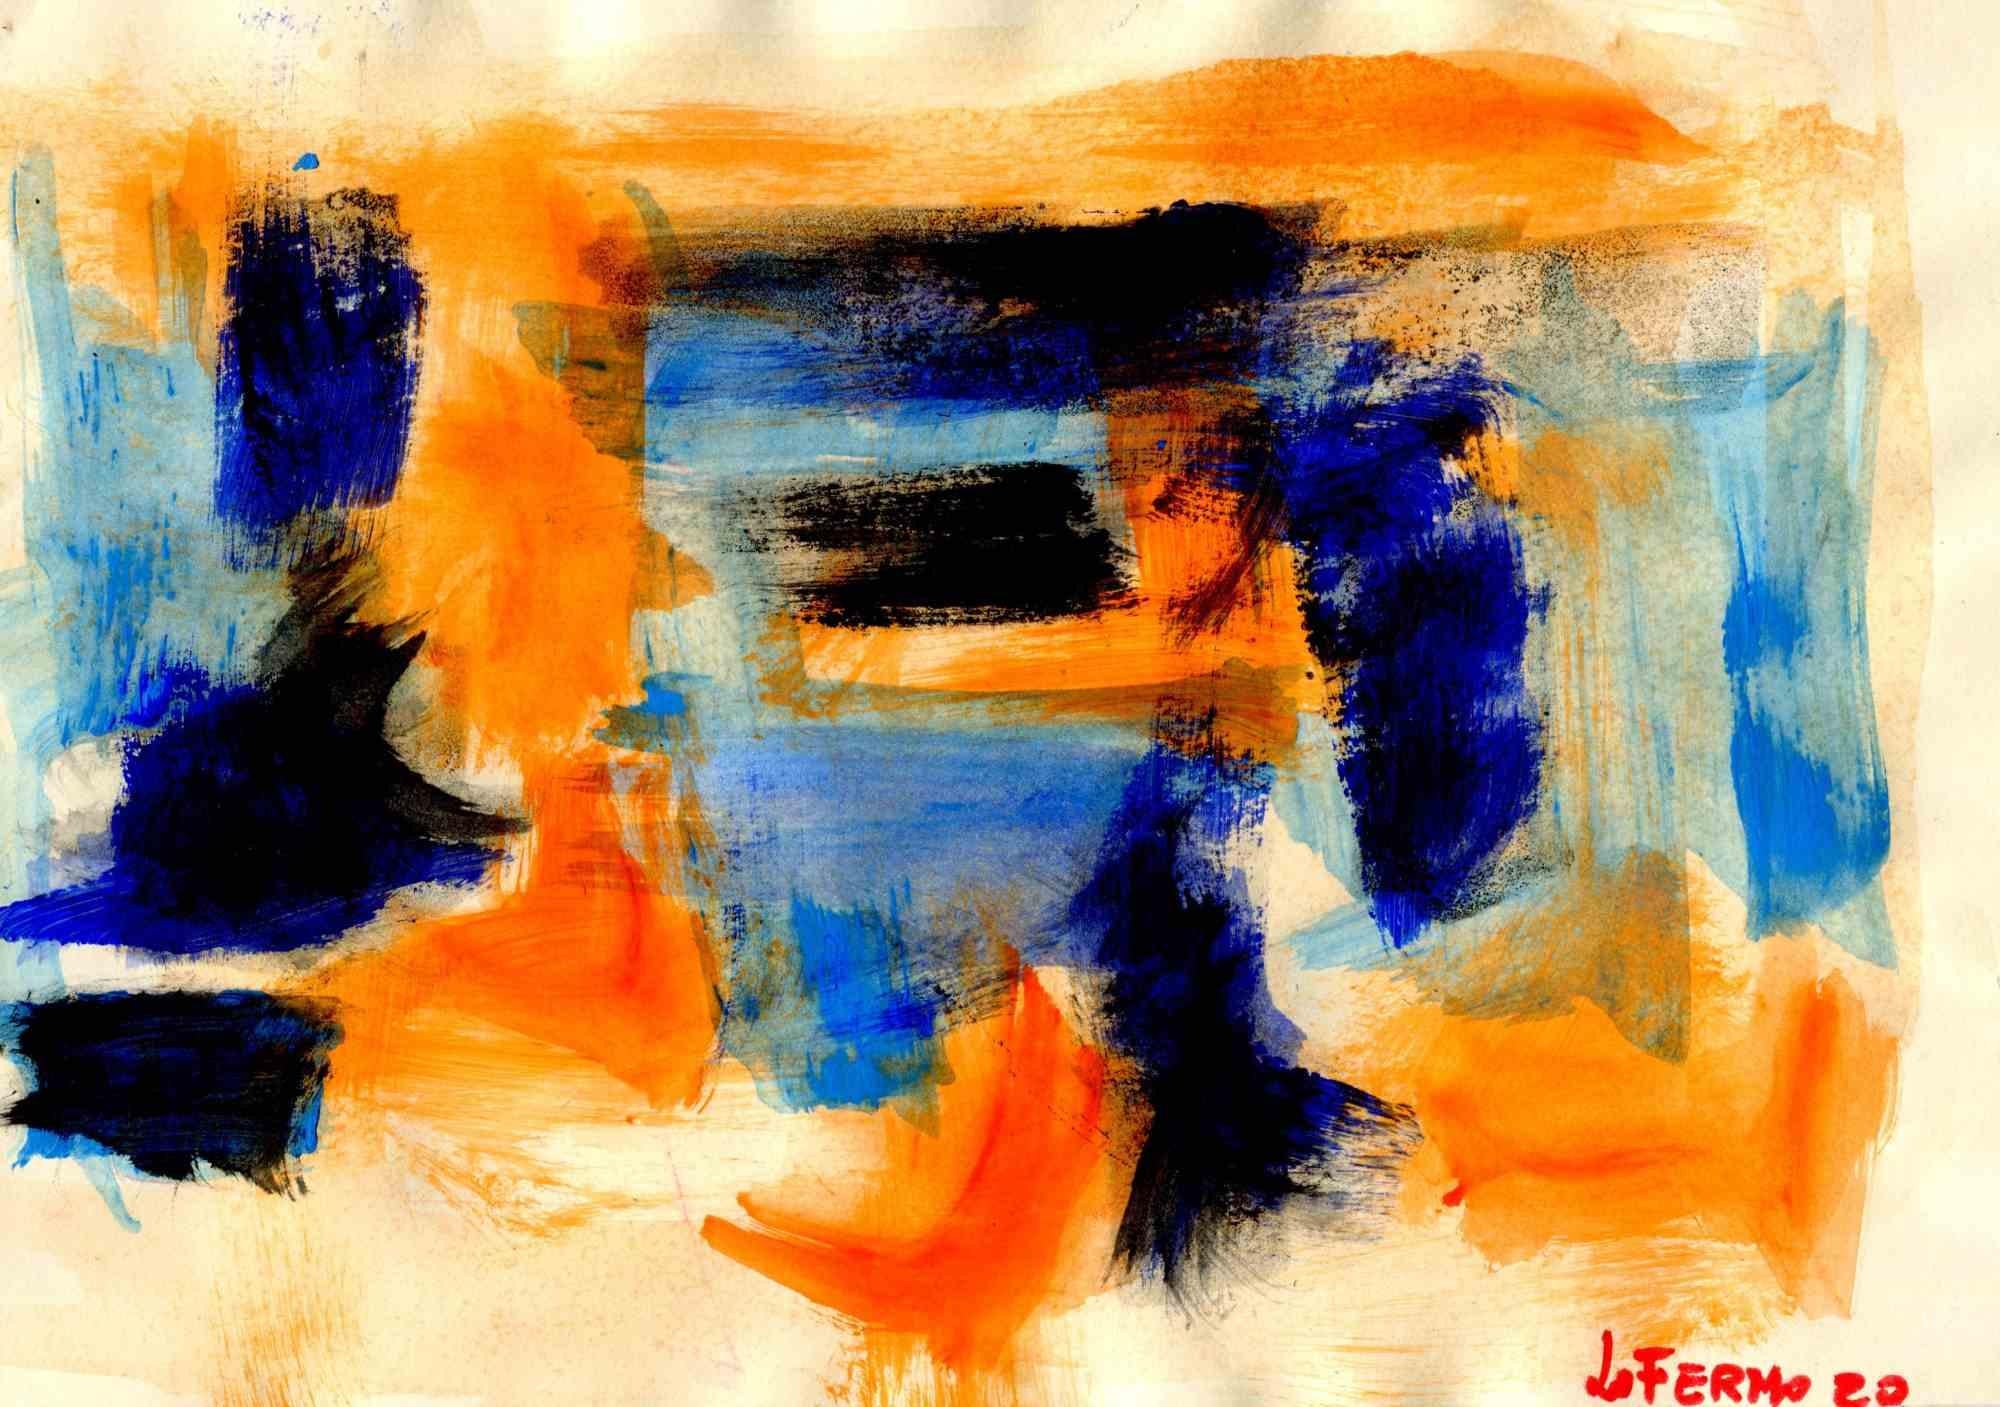 Abstract Composition is a drawing in Tempera and Watercolor on paper realized by Giorgio Lo Fermo.

Good Conditions.

The Artwork is Depicted through strong strokes in a well-balanced composition.

Giorgio Lo Fermo  is an Italian painter and